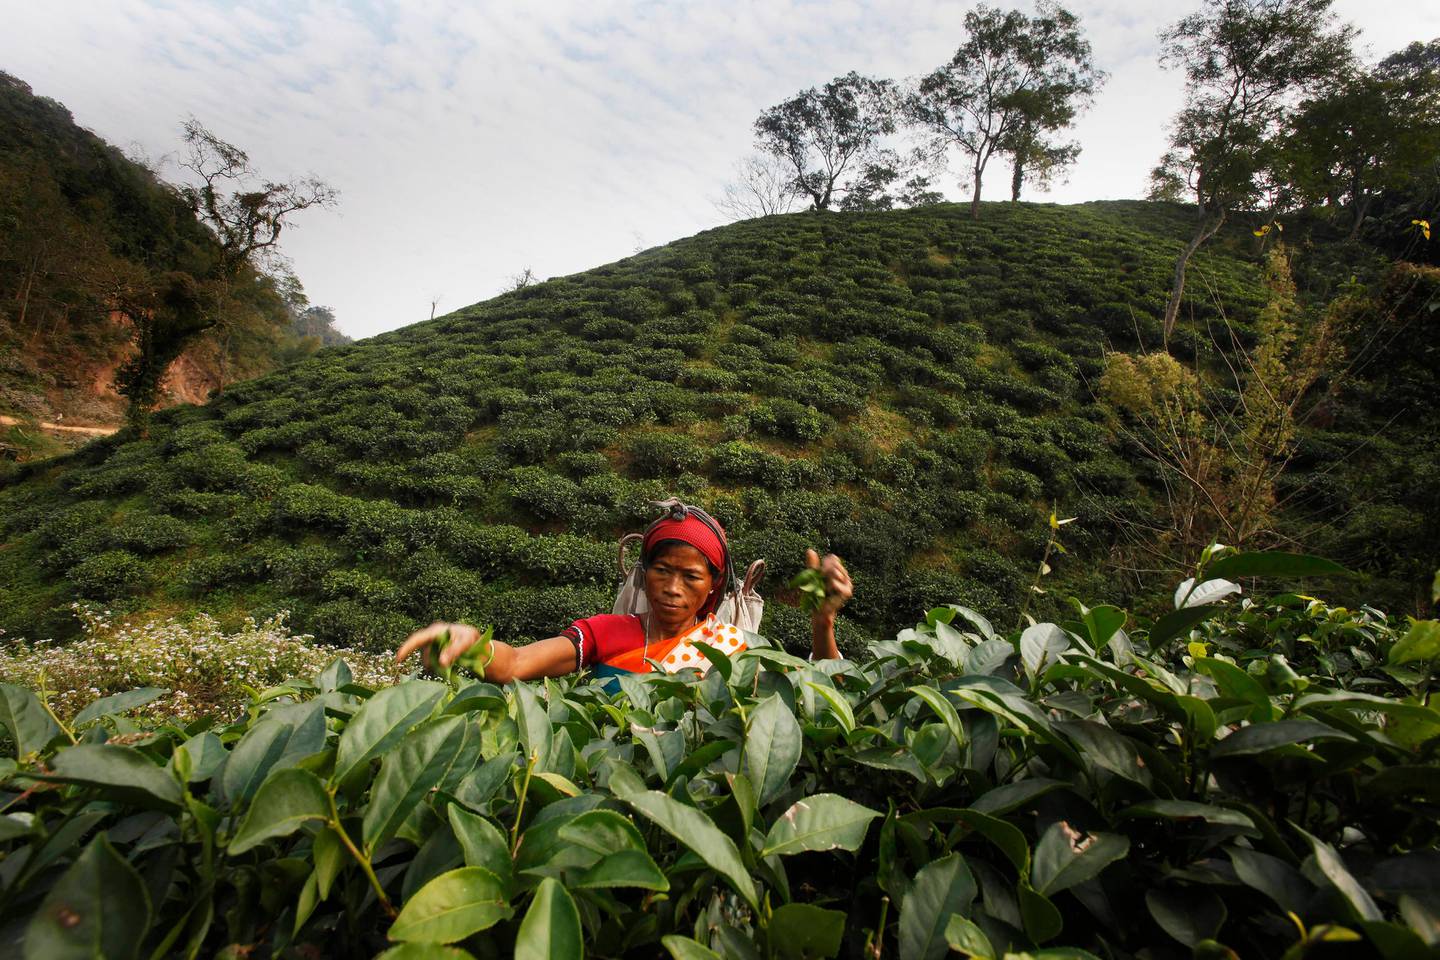 An Indian laborer plucks tea leaves at a tea garden in Amchong tea estate, about 45 kilometers (28 miles) east of Gauhati, India, Friday, Dec. 31, 2010. Tea growers in northeastern India say climate change has hurt the country's tea crop, leading not just to a drop in production but also subtly altering the flavor of their brew. (AP Photo/Anupam Nath)